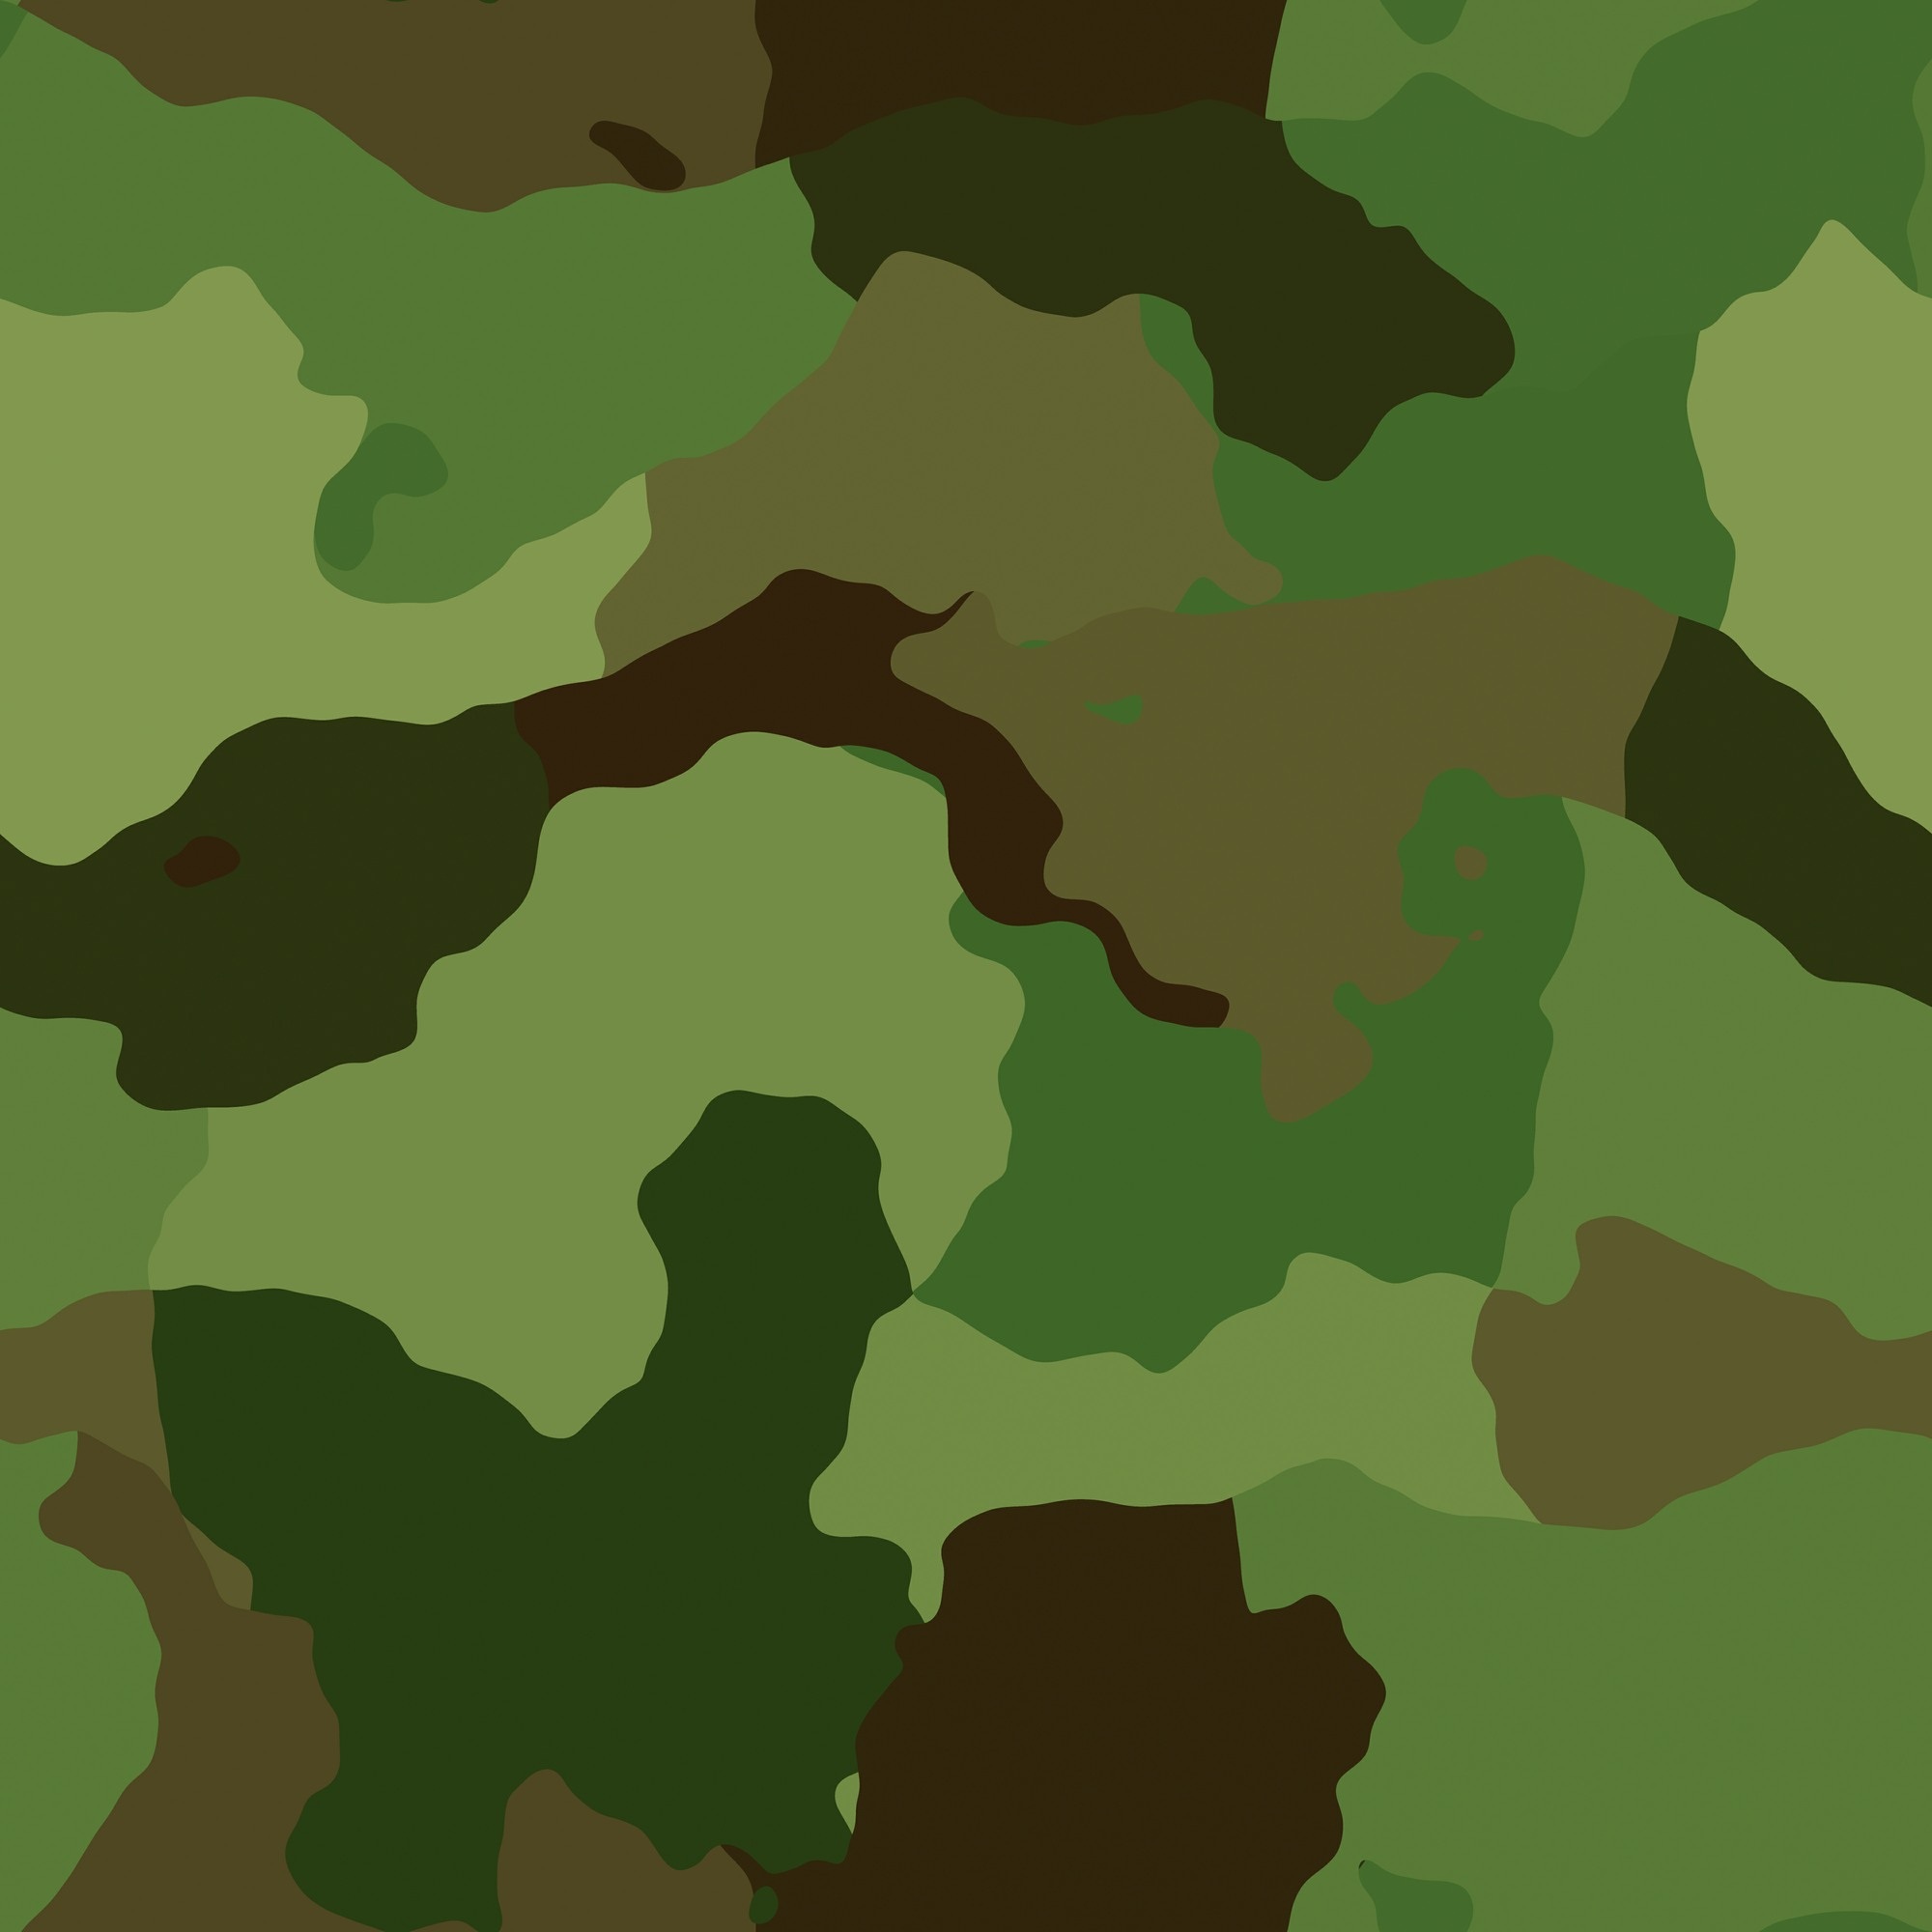 camouflage, texture, patterns, textures, military